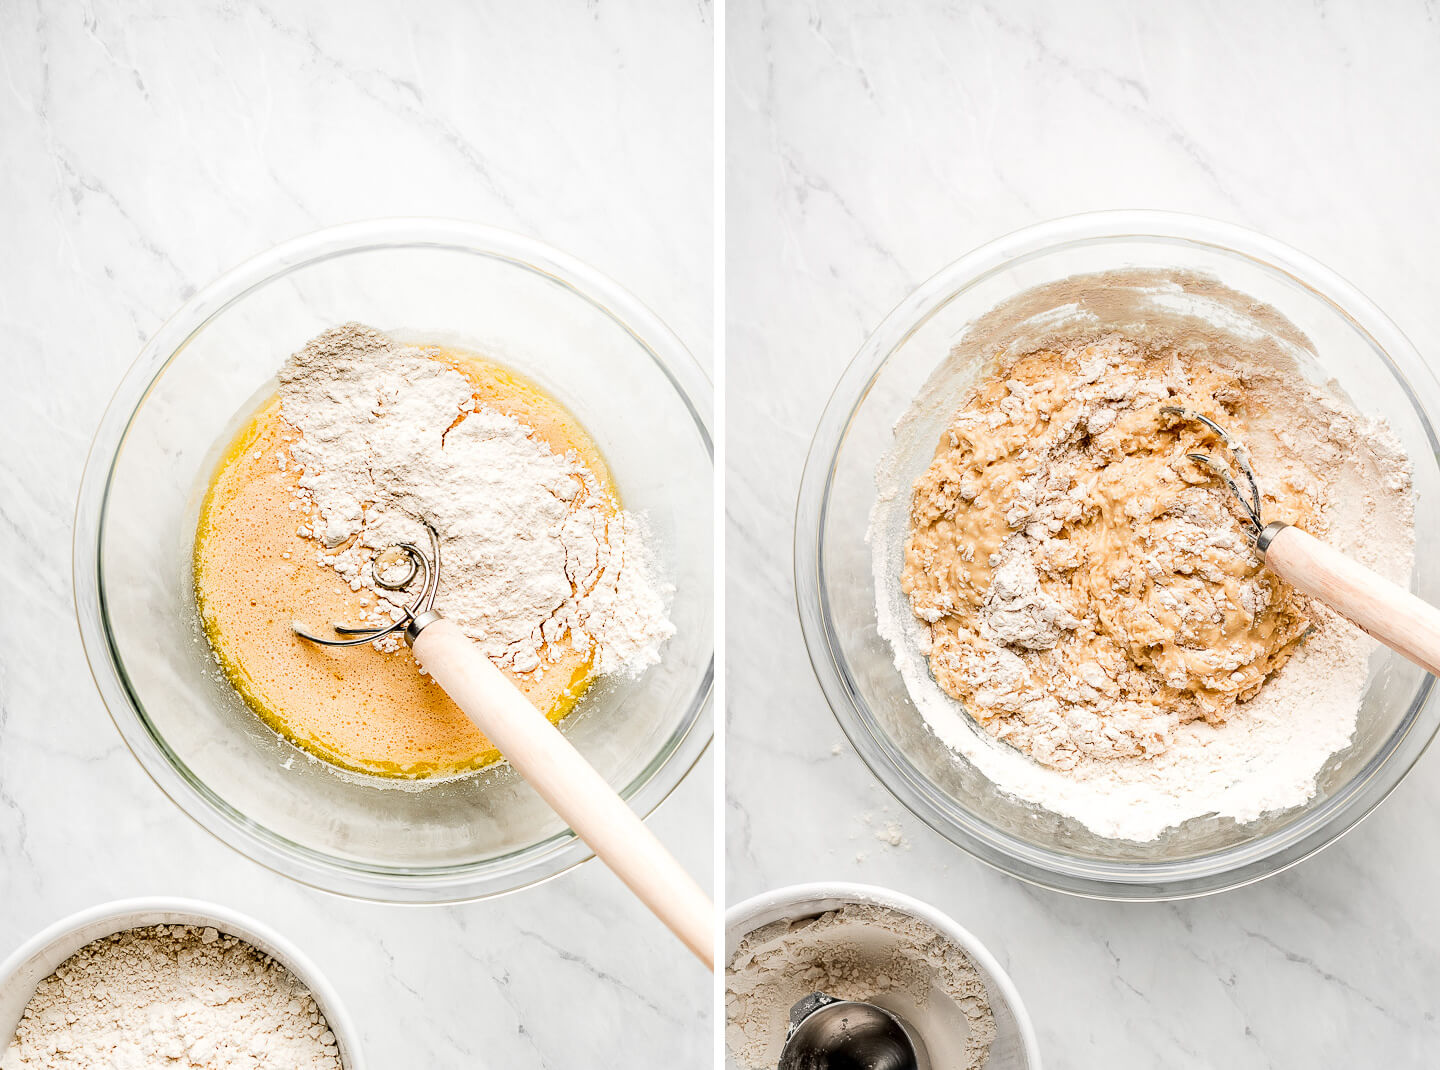 Diptych- Mixing flour into a bowl yeast, butter, and water with a danish whisk; more flour added to the bowl to create a dough.